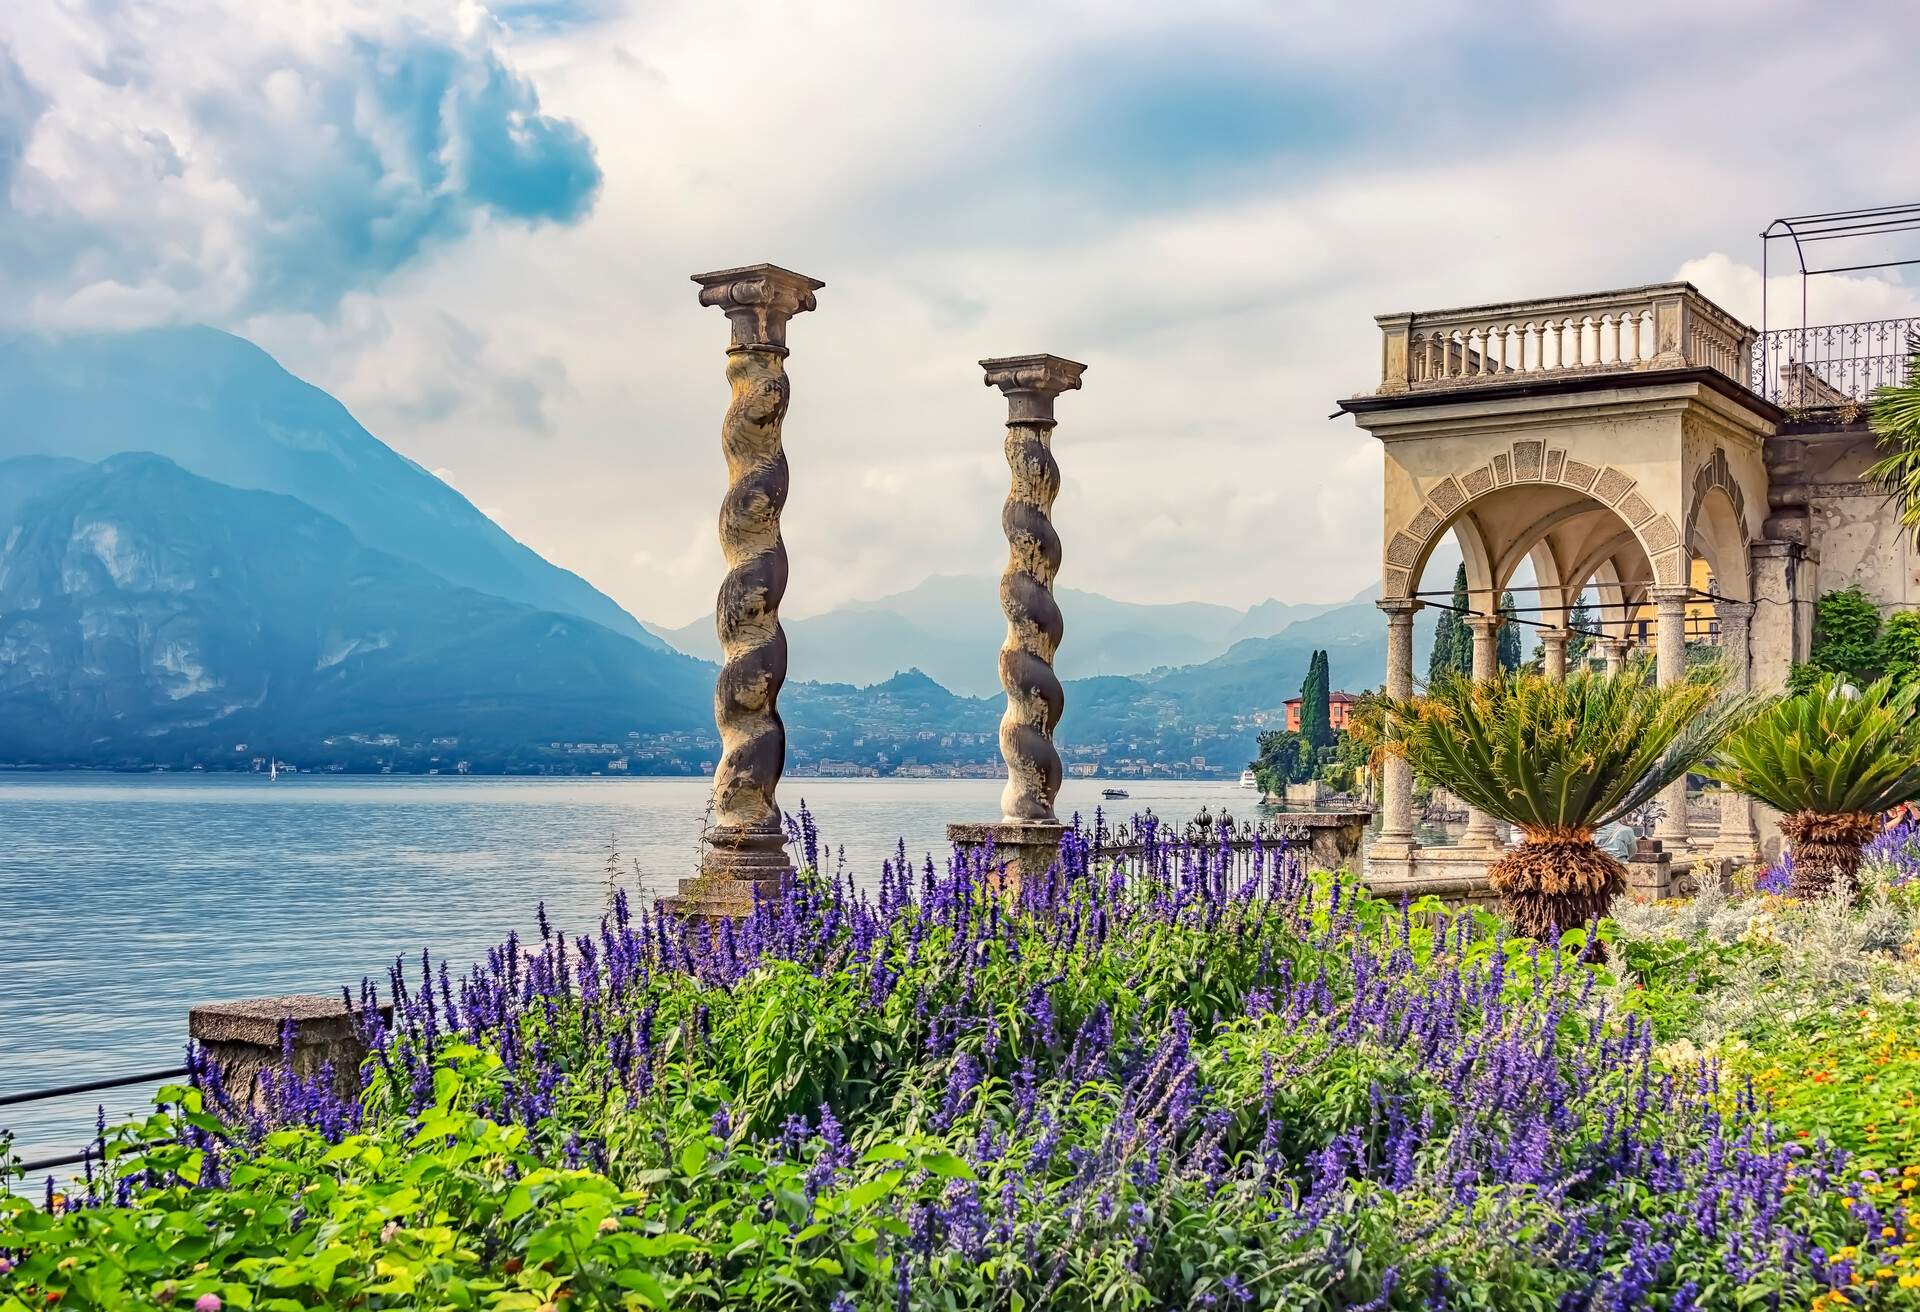 DEST_ITALY_LAKE_COMO_GettyImages-1322805878